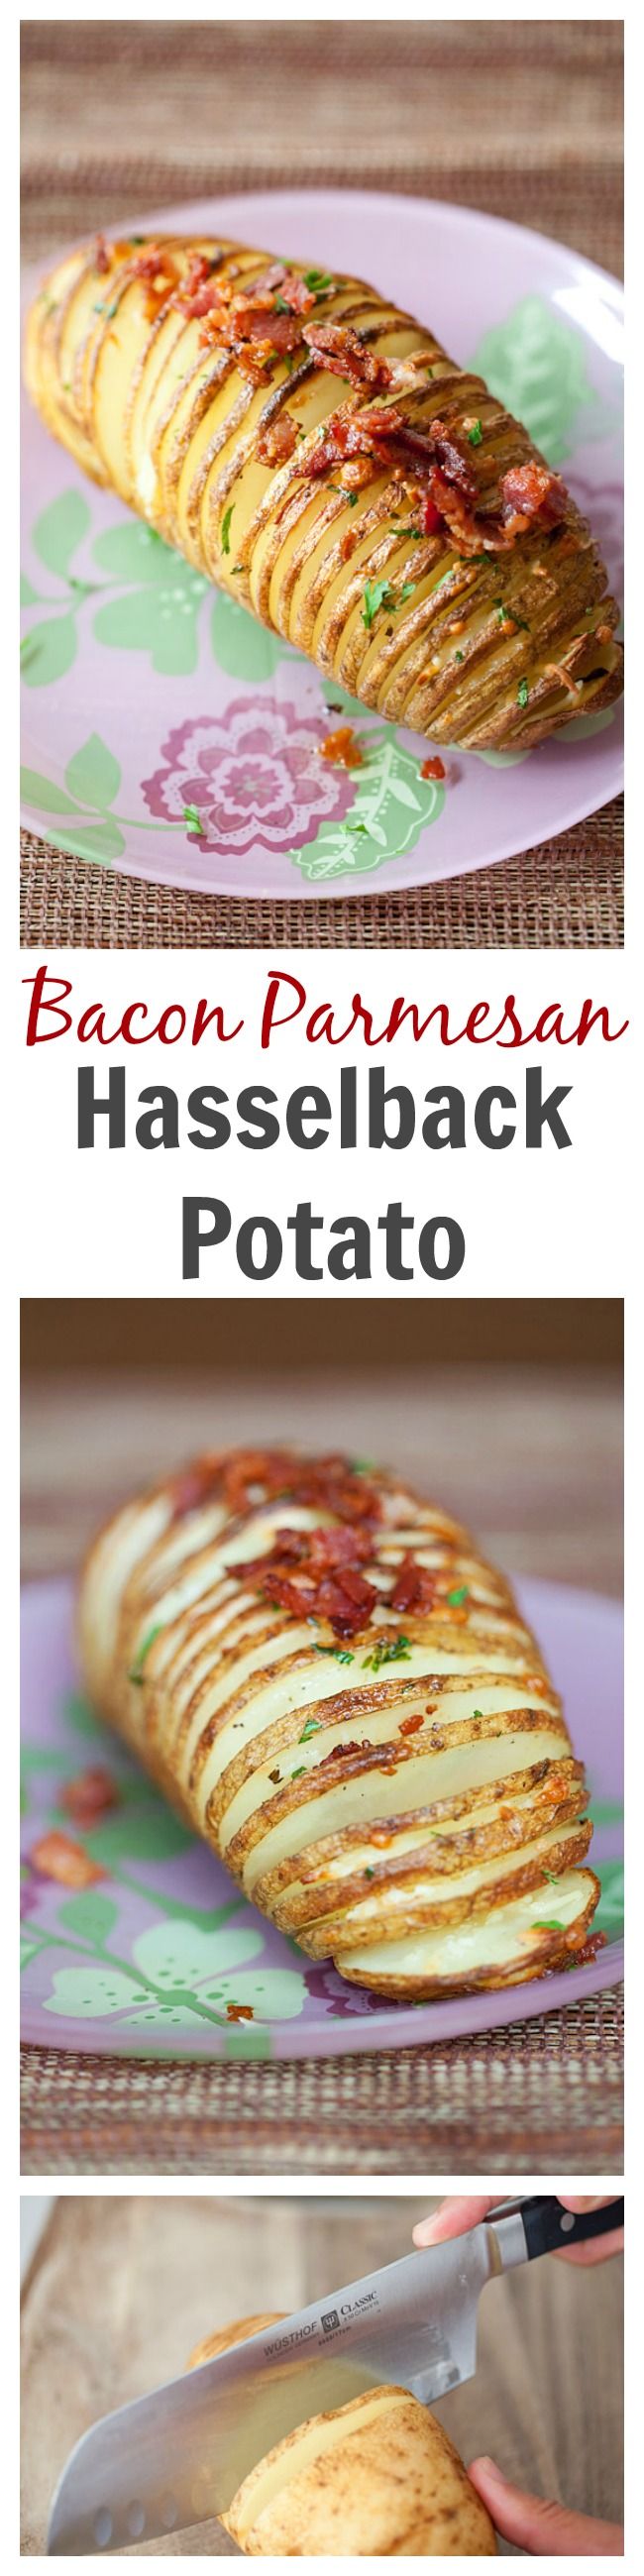 Hasselback Potatoes with bacon & parmesan. Easy hasselback potatoes at its best. Sinfully delicious but quick and super easy to make | rasamalaysia.com